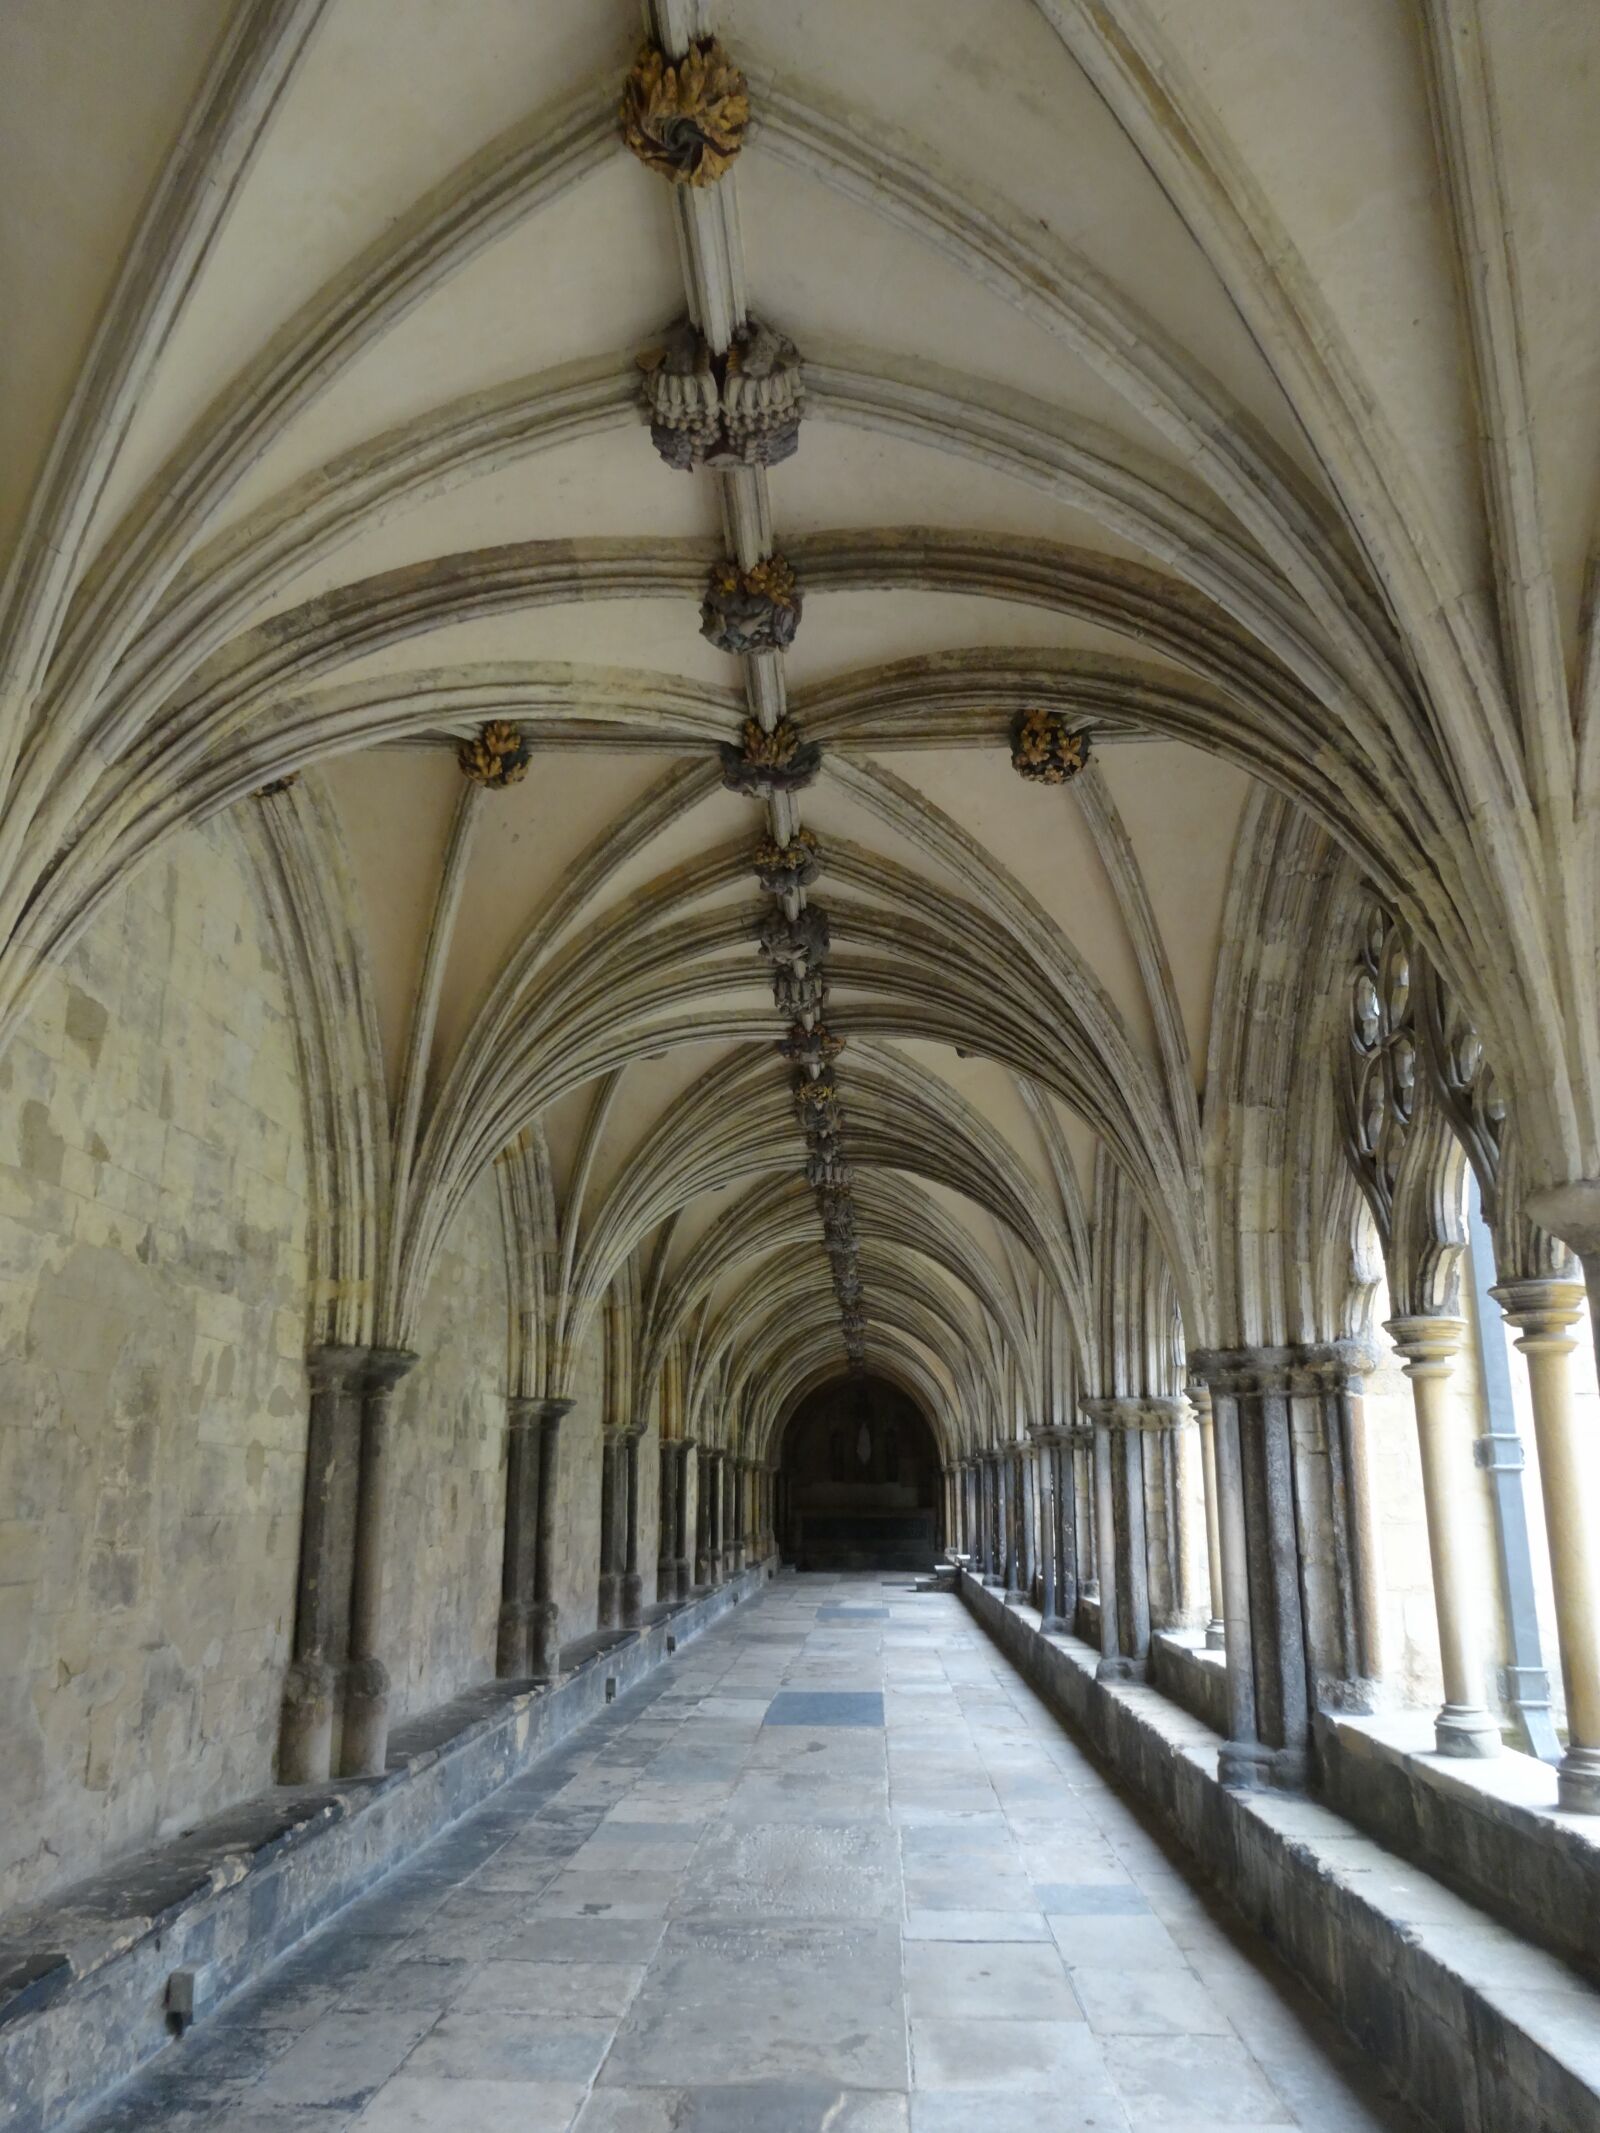 Sony Cyber-shot DSC-WX300 sample photo. Cloister, vault, architecture photography